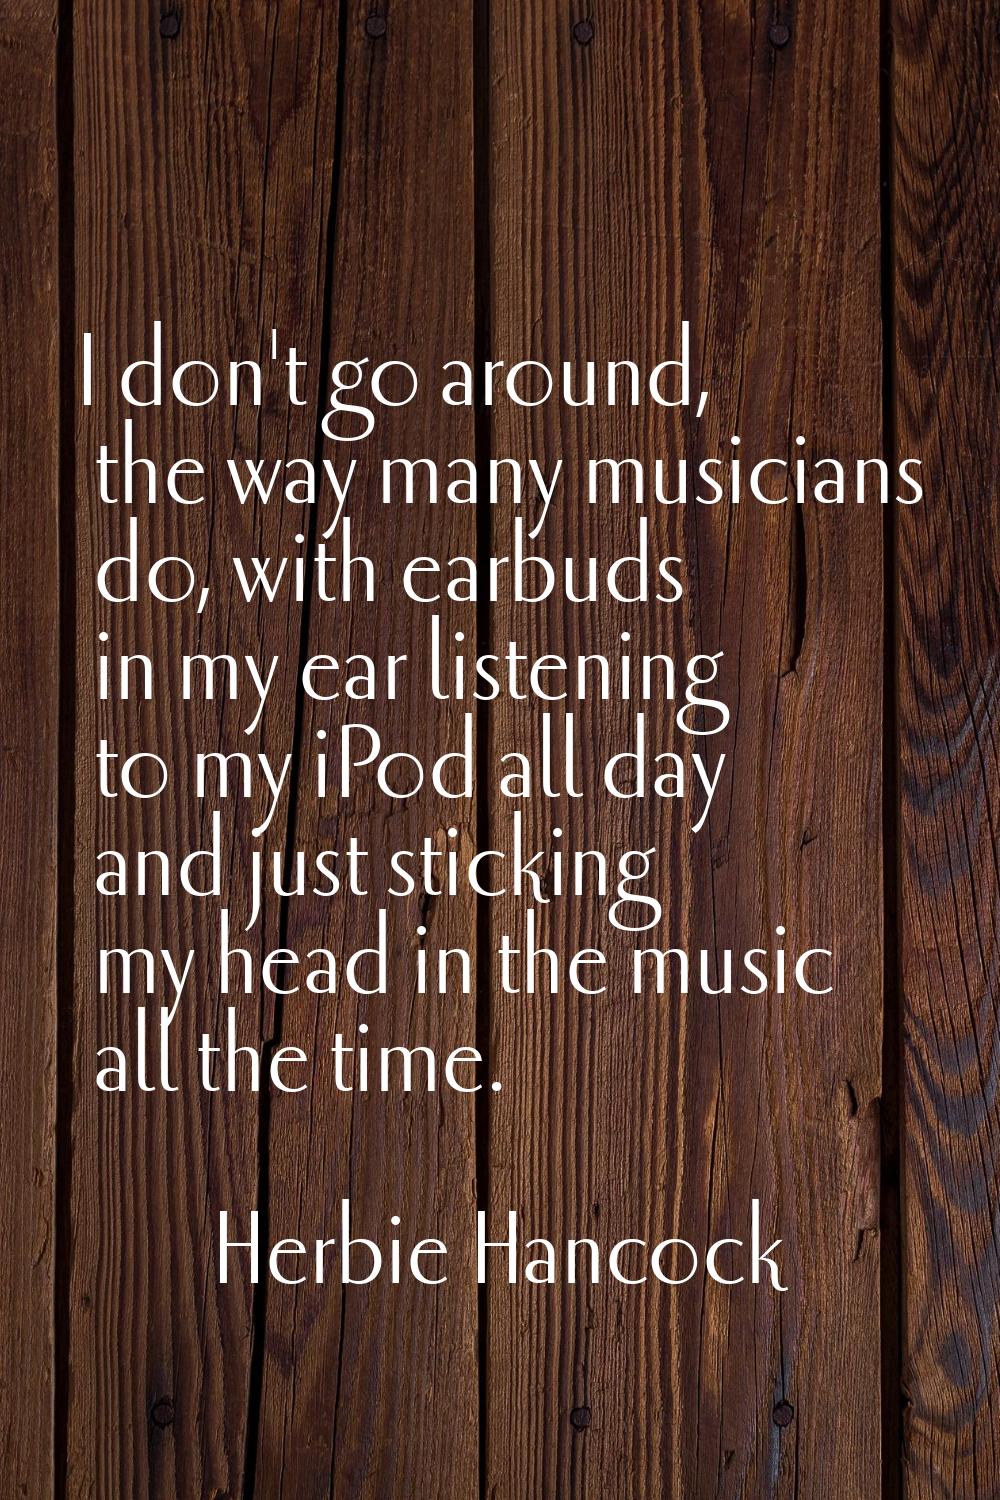 I don't go around, the way many musicians do, with earbuds in my ear listening to my iPod all day a